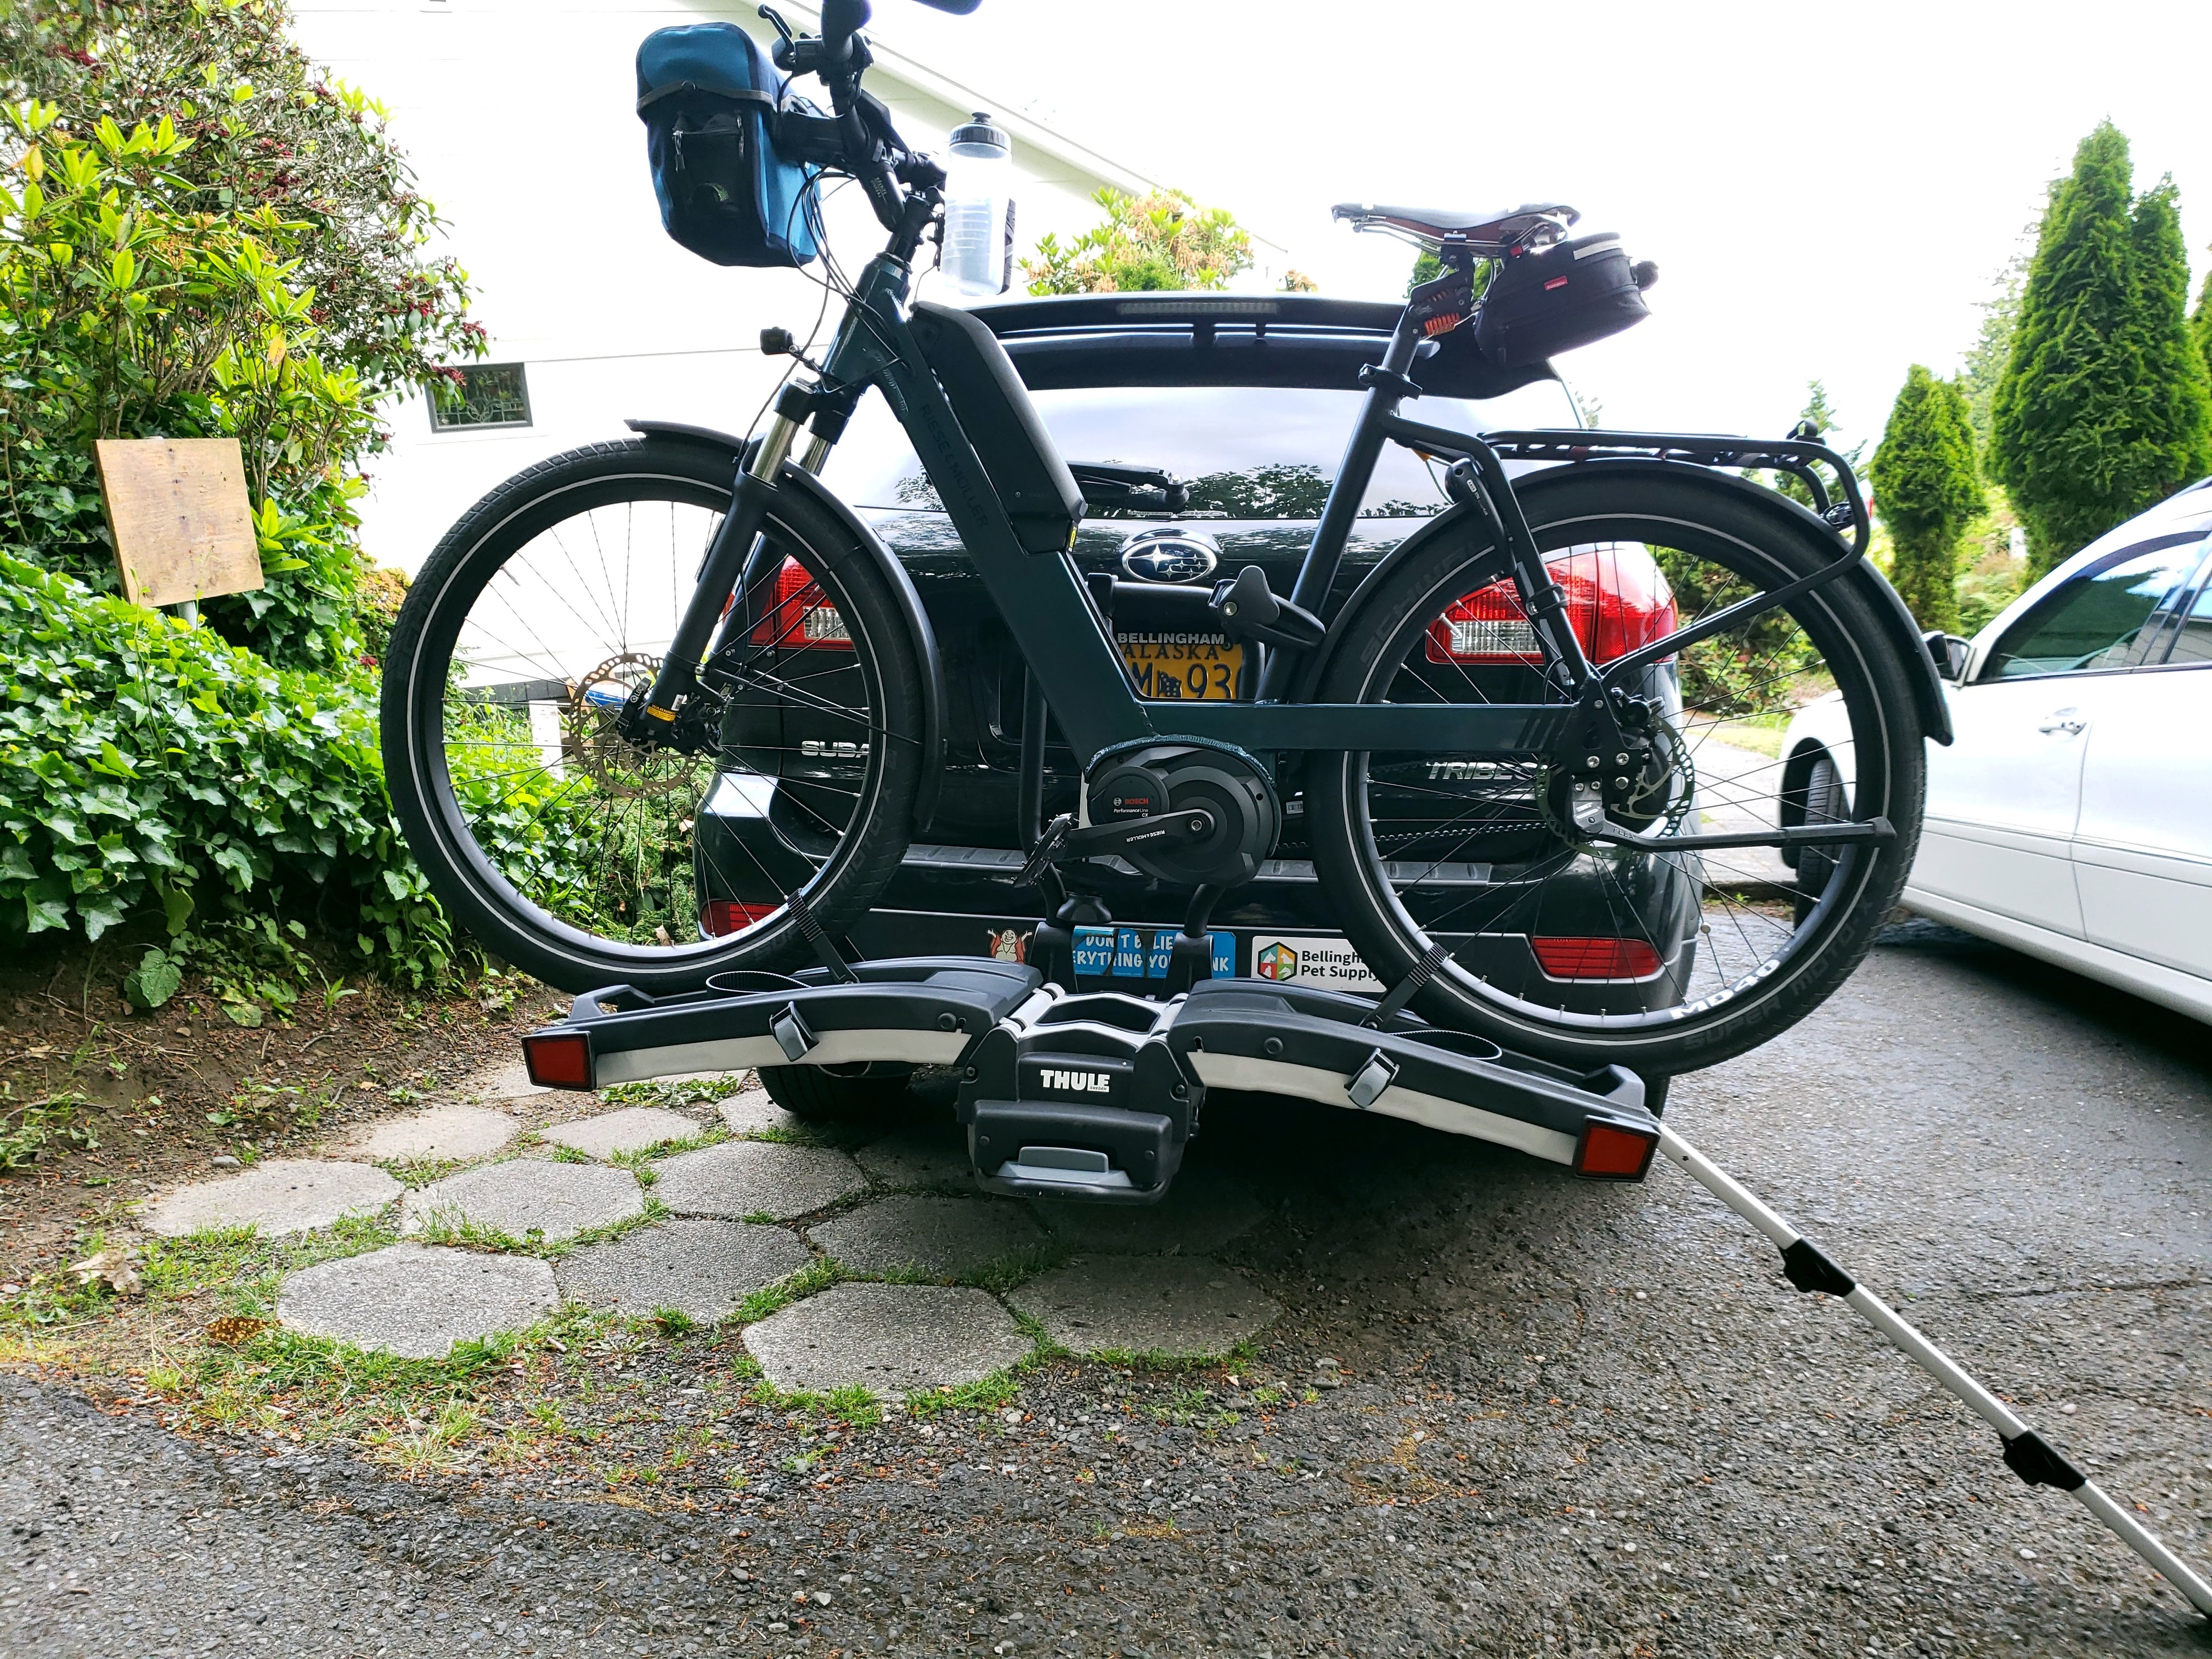 https://forums.electricbikereview.com/attachments/20180611_071020-jpg.22632/